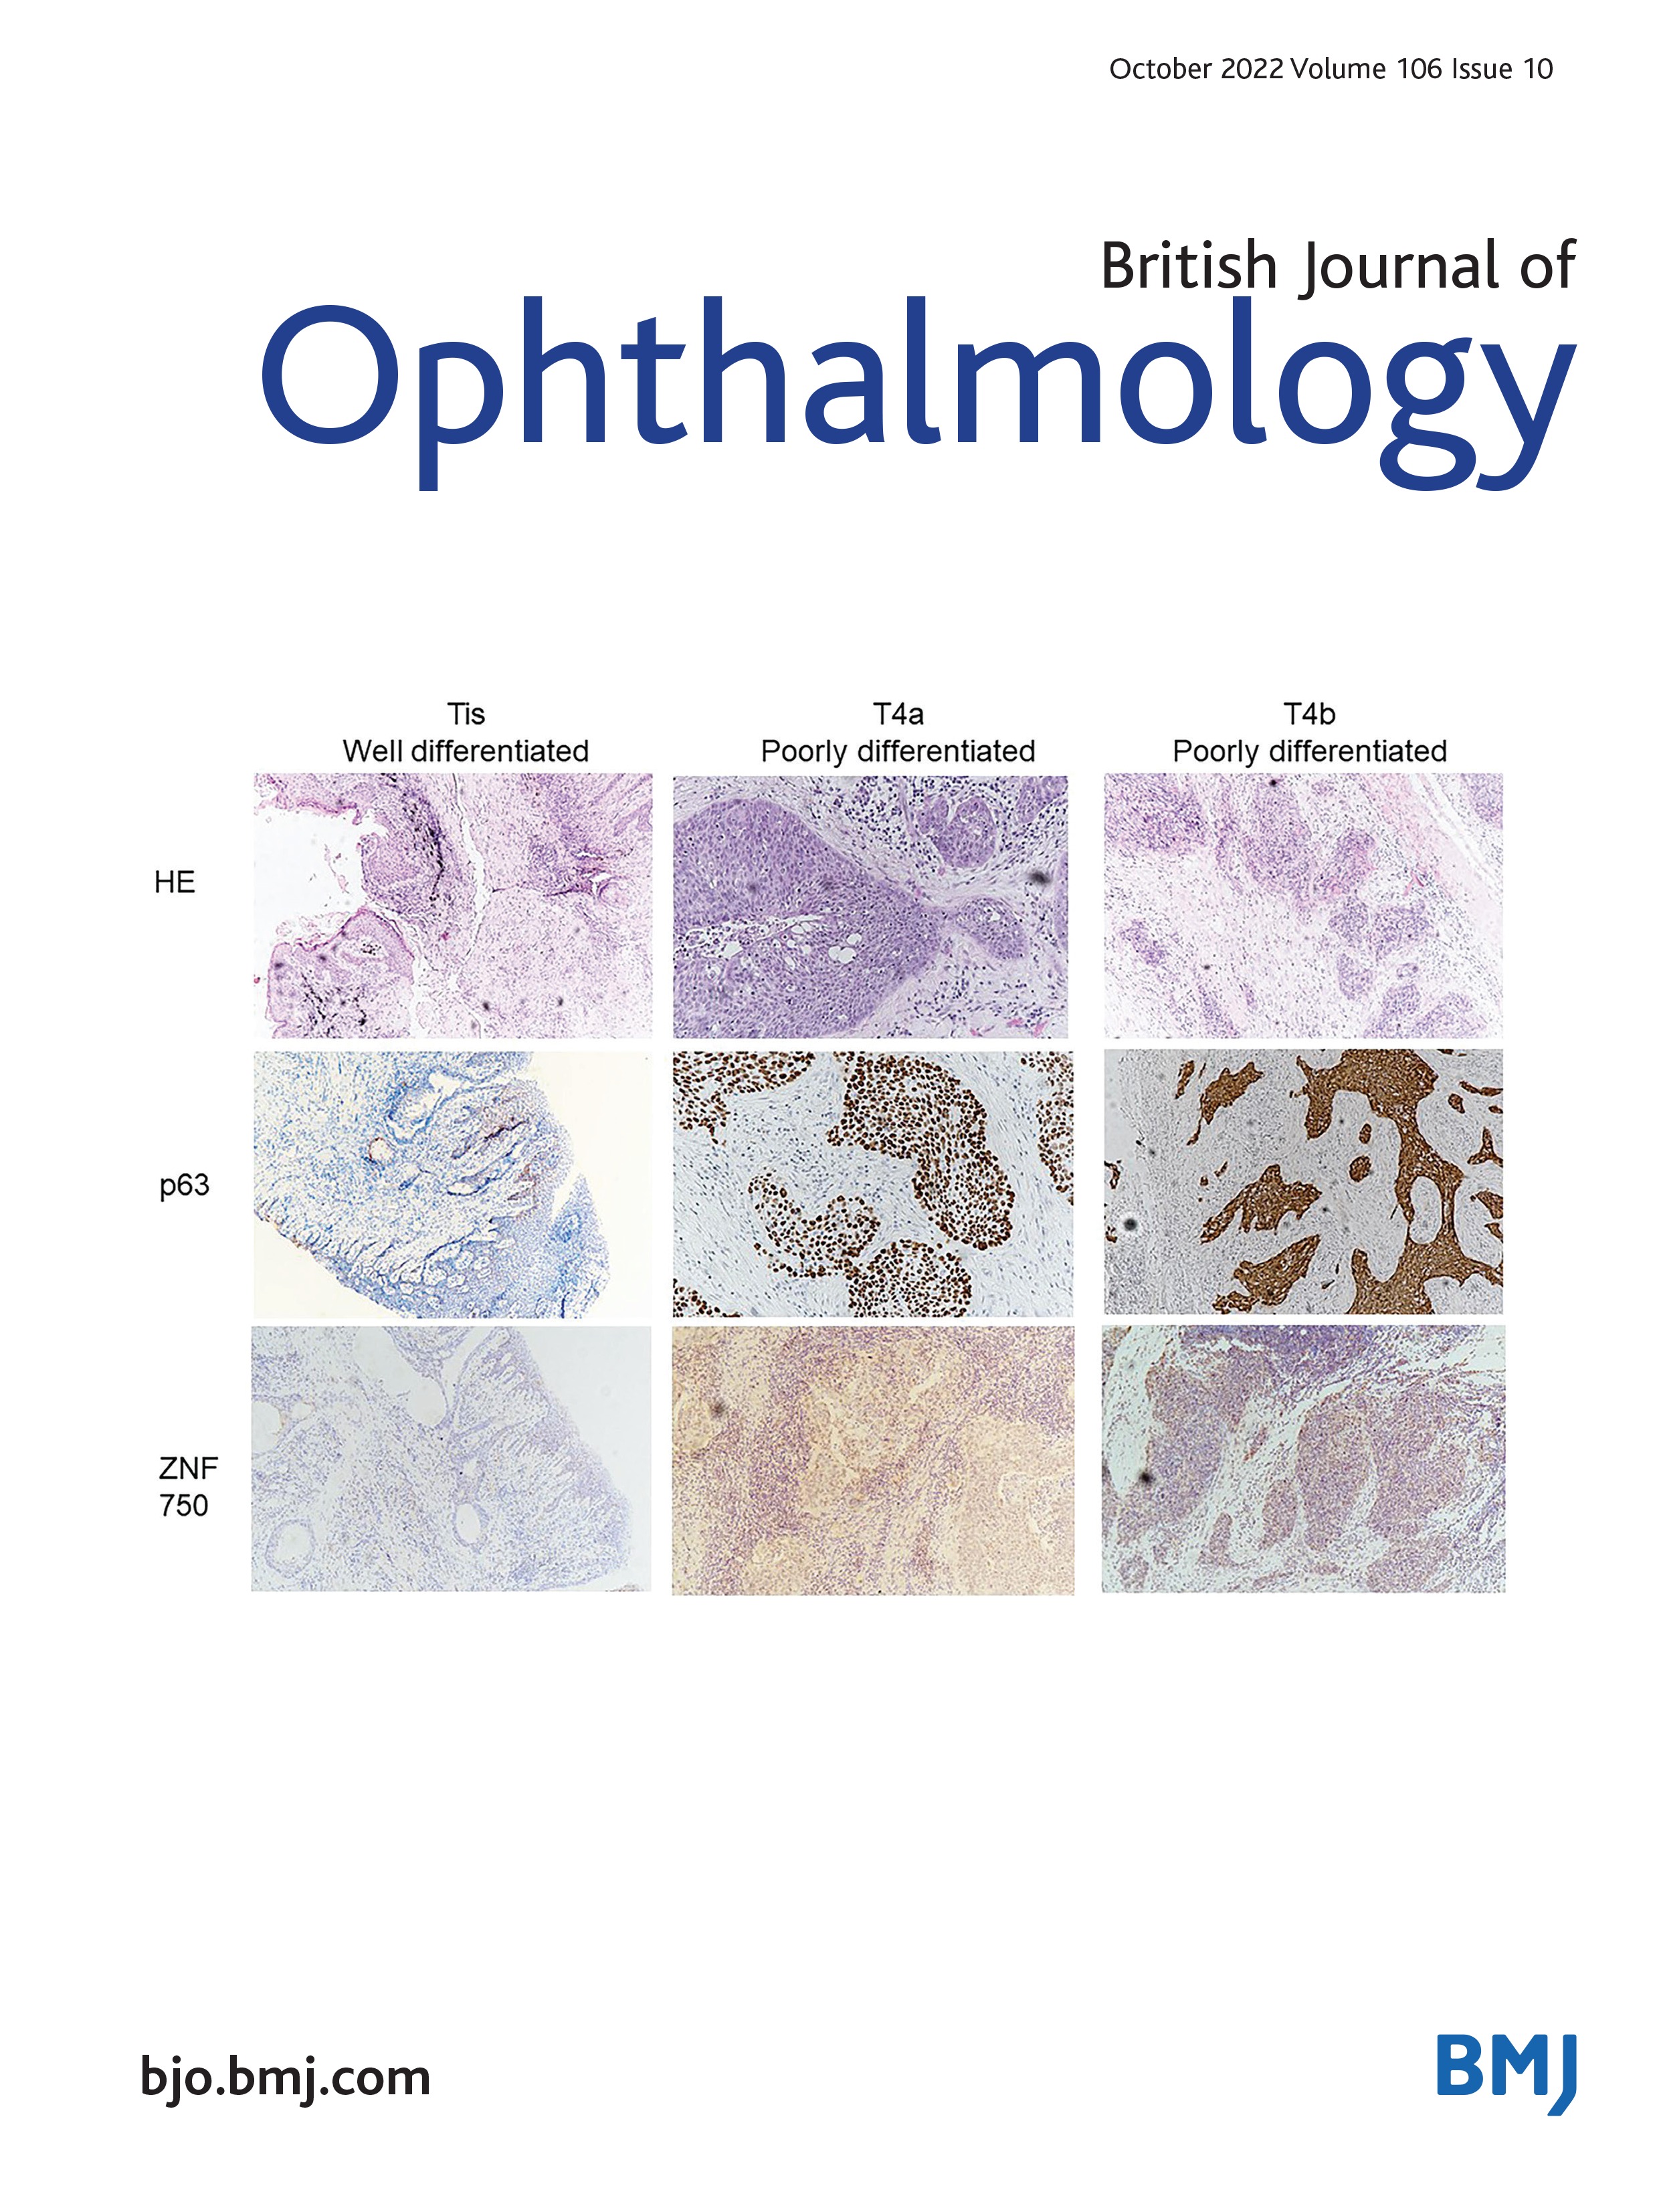 P63 expression in eyelid squamous cell carcinoma